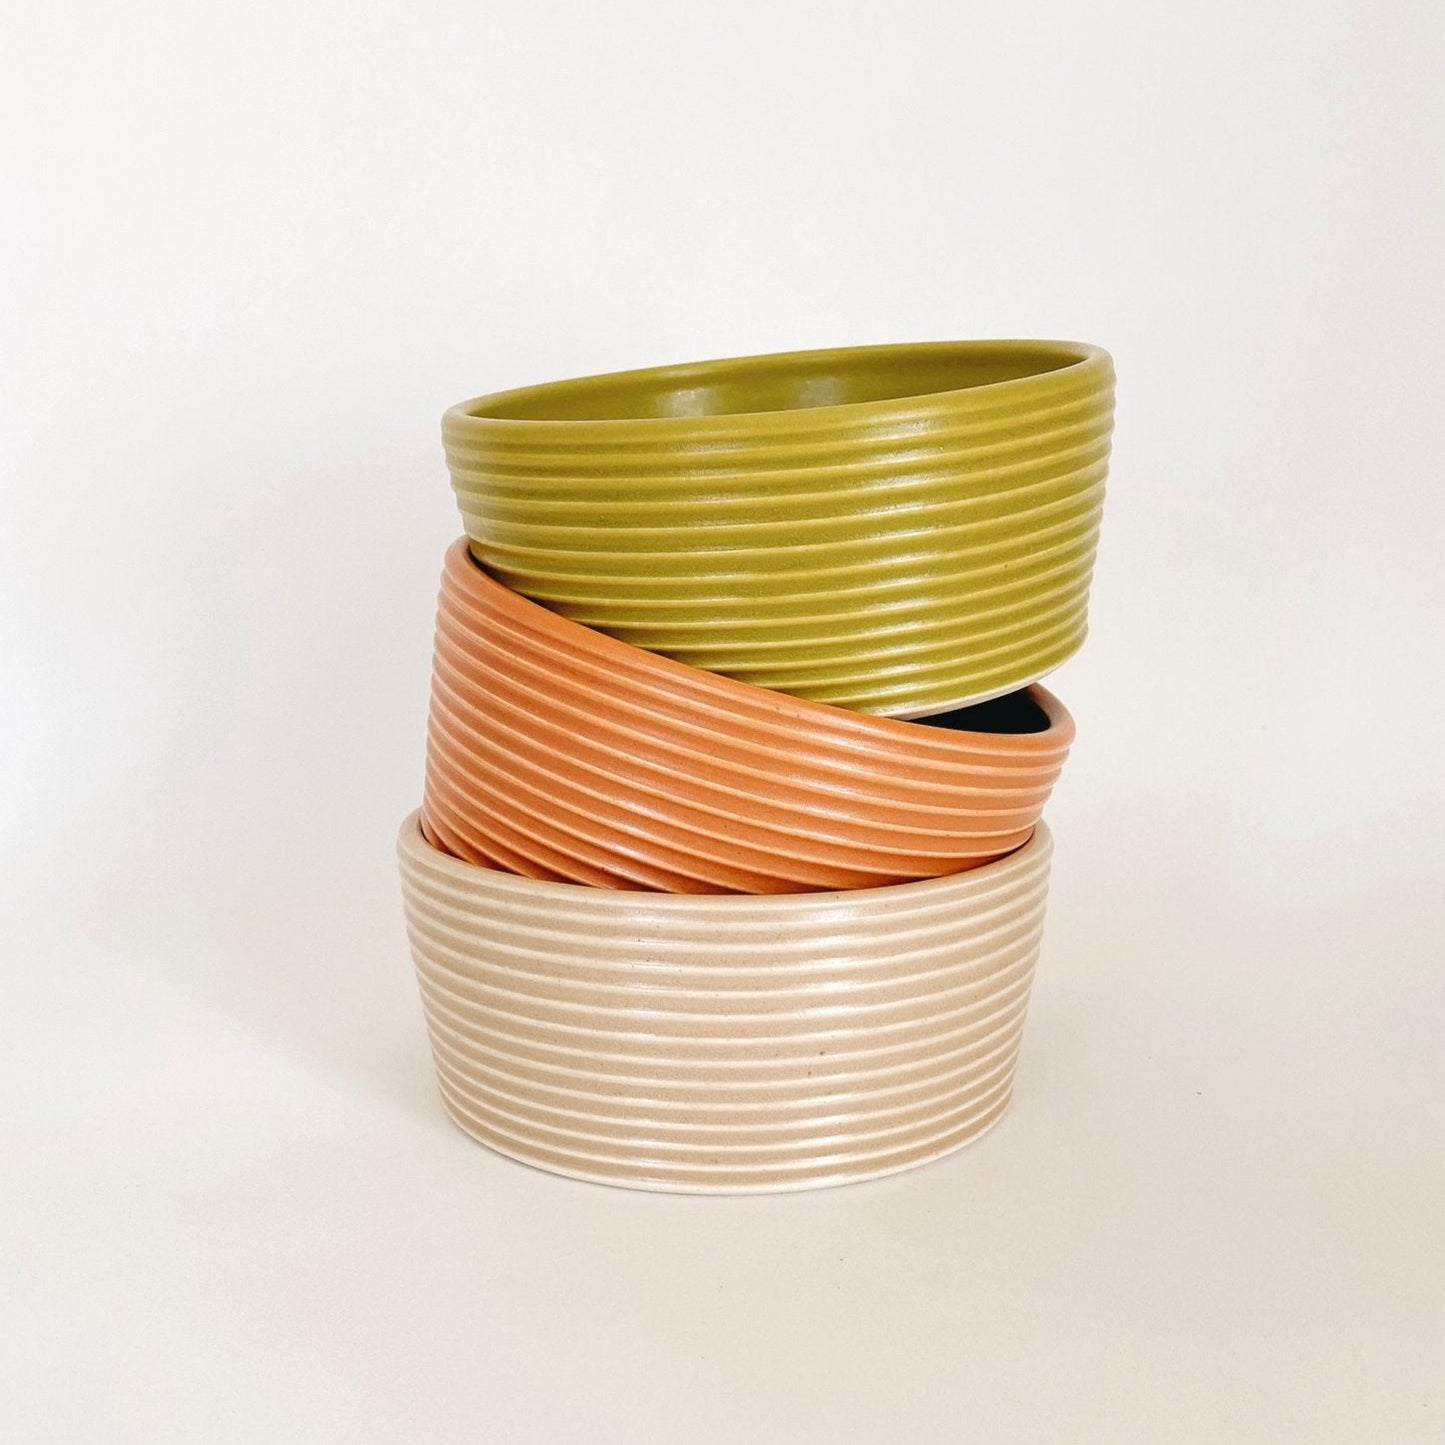 3 pieces of Wheel-thrown ribbed ceramic stoneware dinner bowl with handmade glaze in orange, yellow and white color. 6" x 2.5"